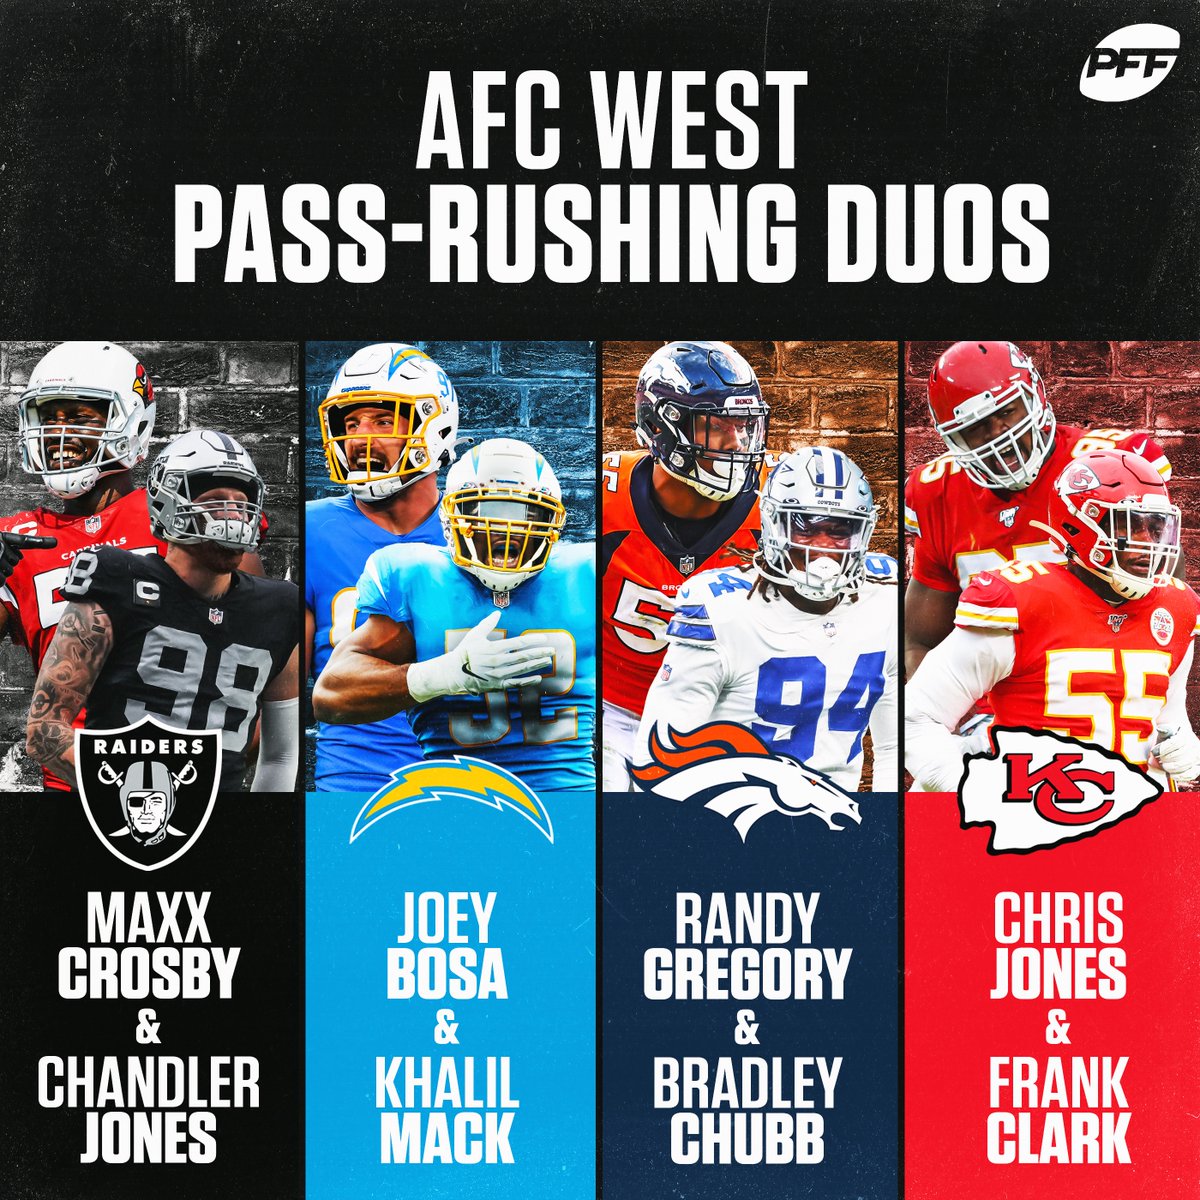 In AFC West's group of elite edge-rushing duos, Broncos have boom